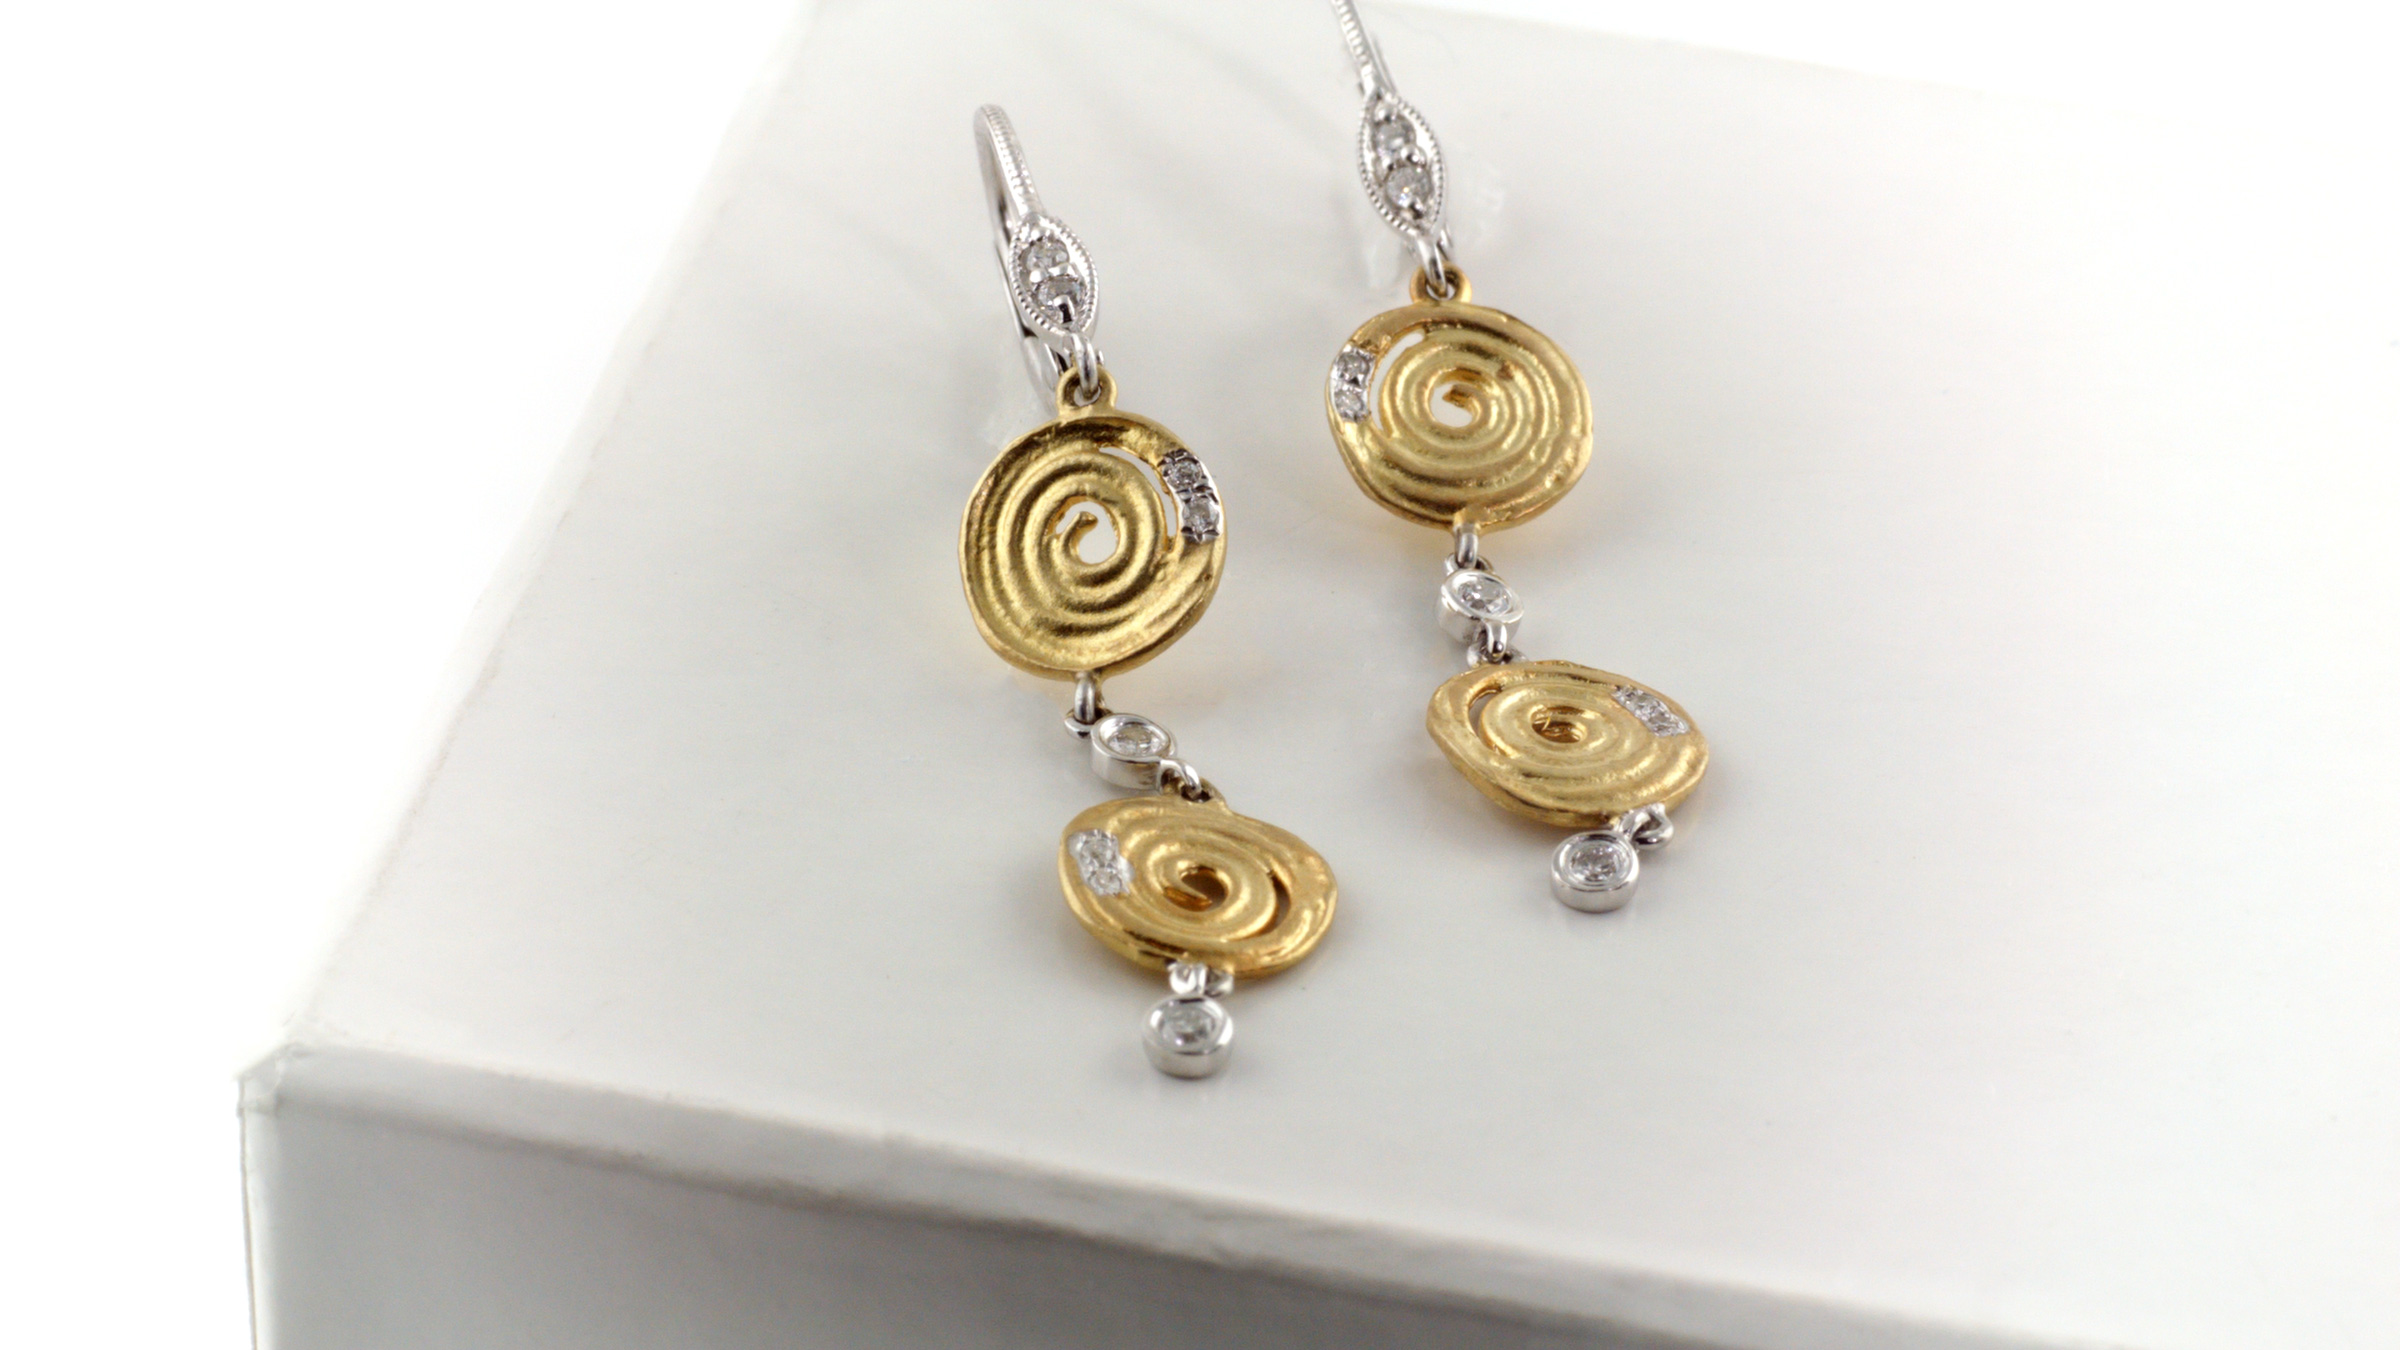 14K yellow gold earrings with white gold and diamond accents.